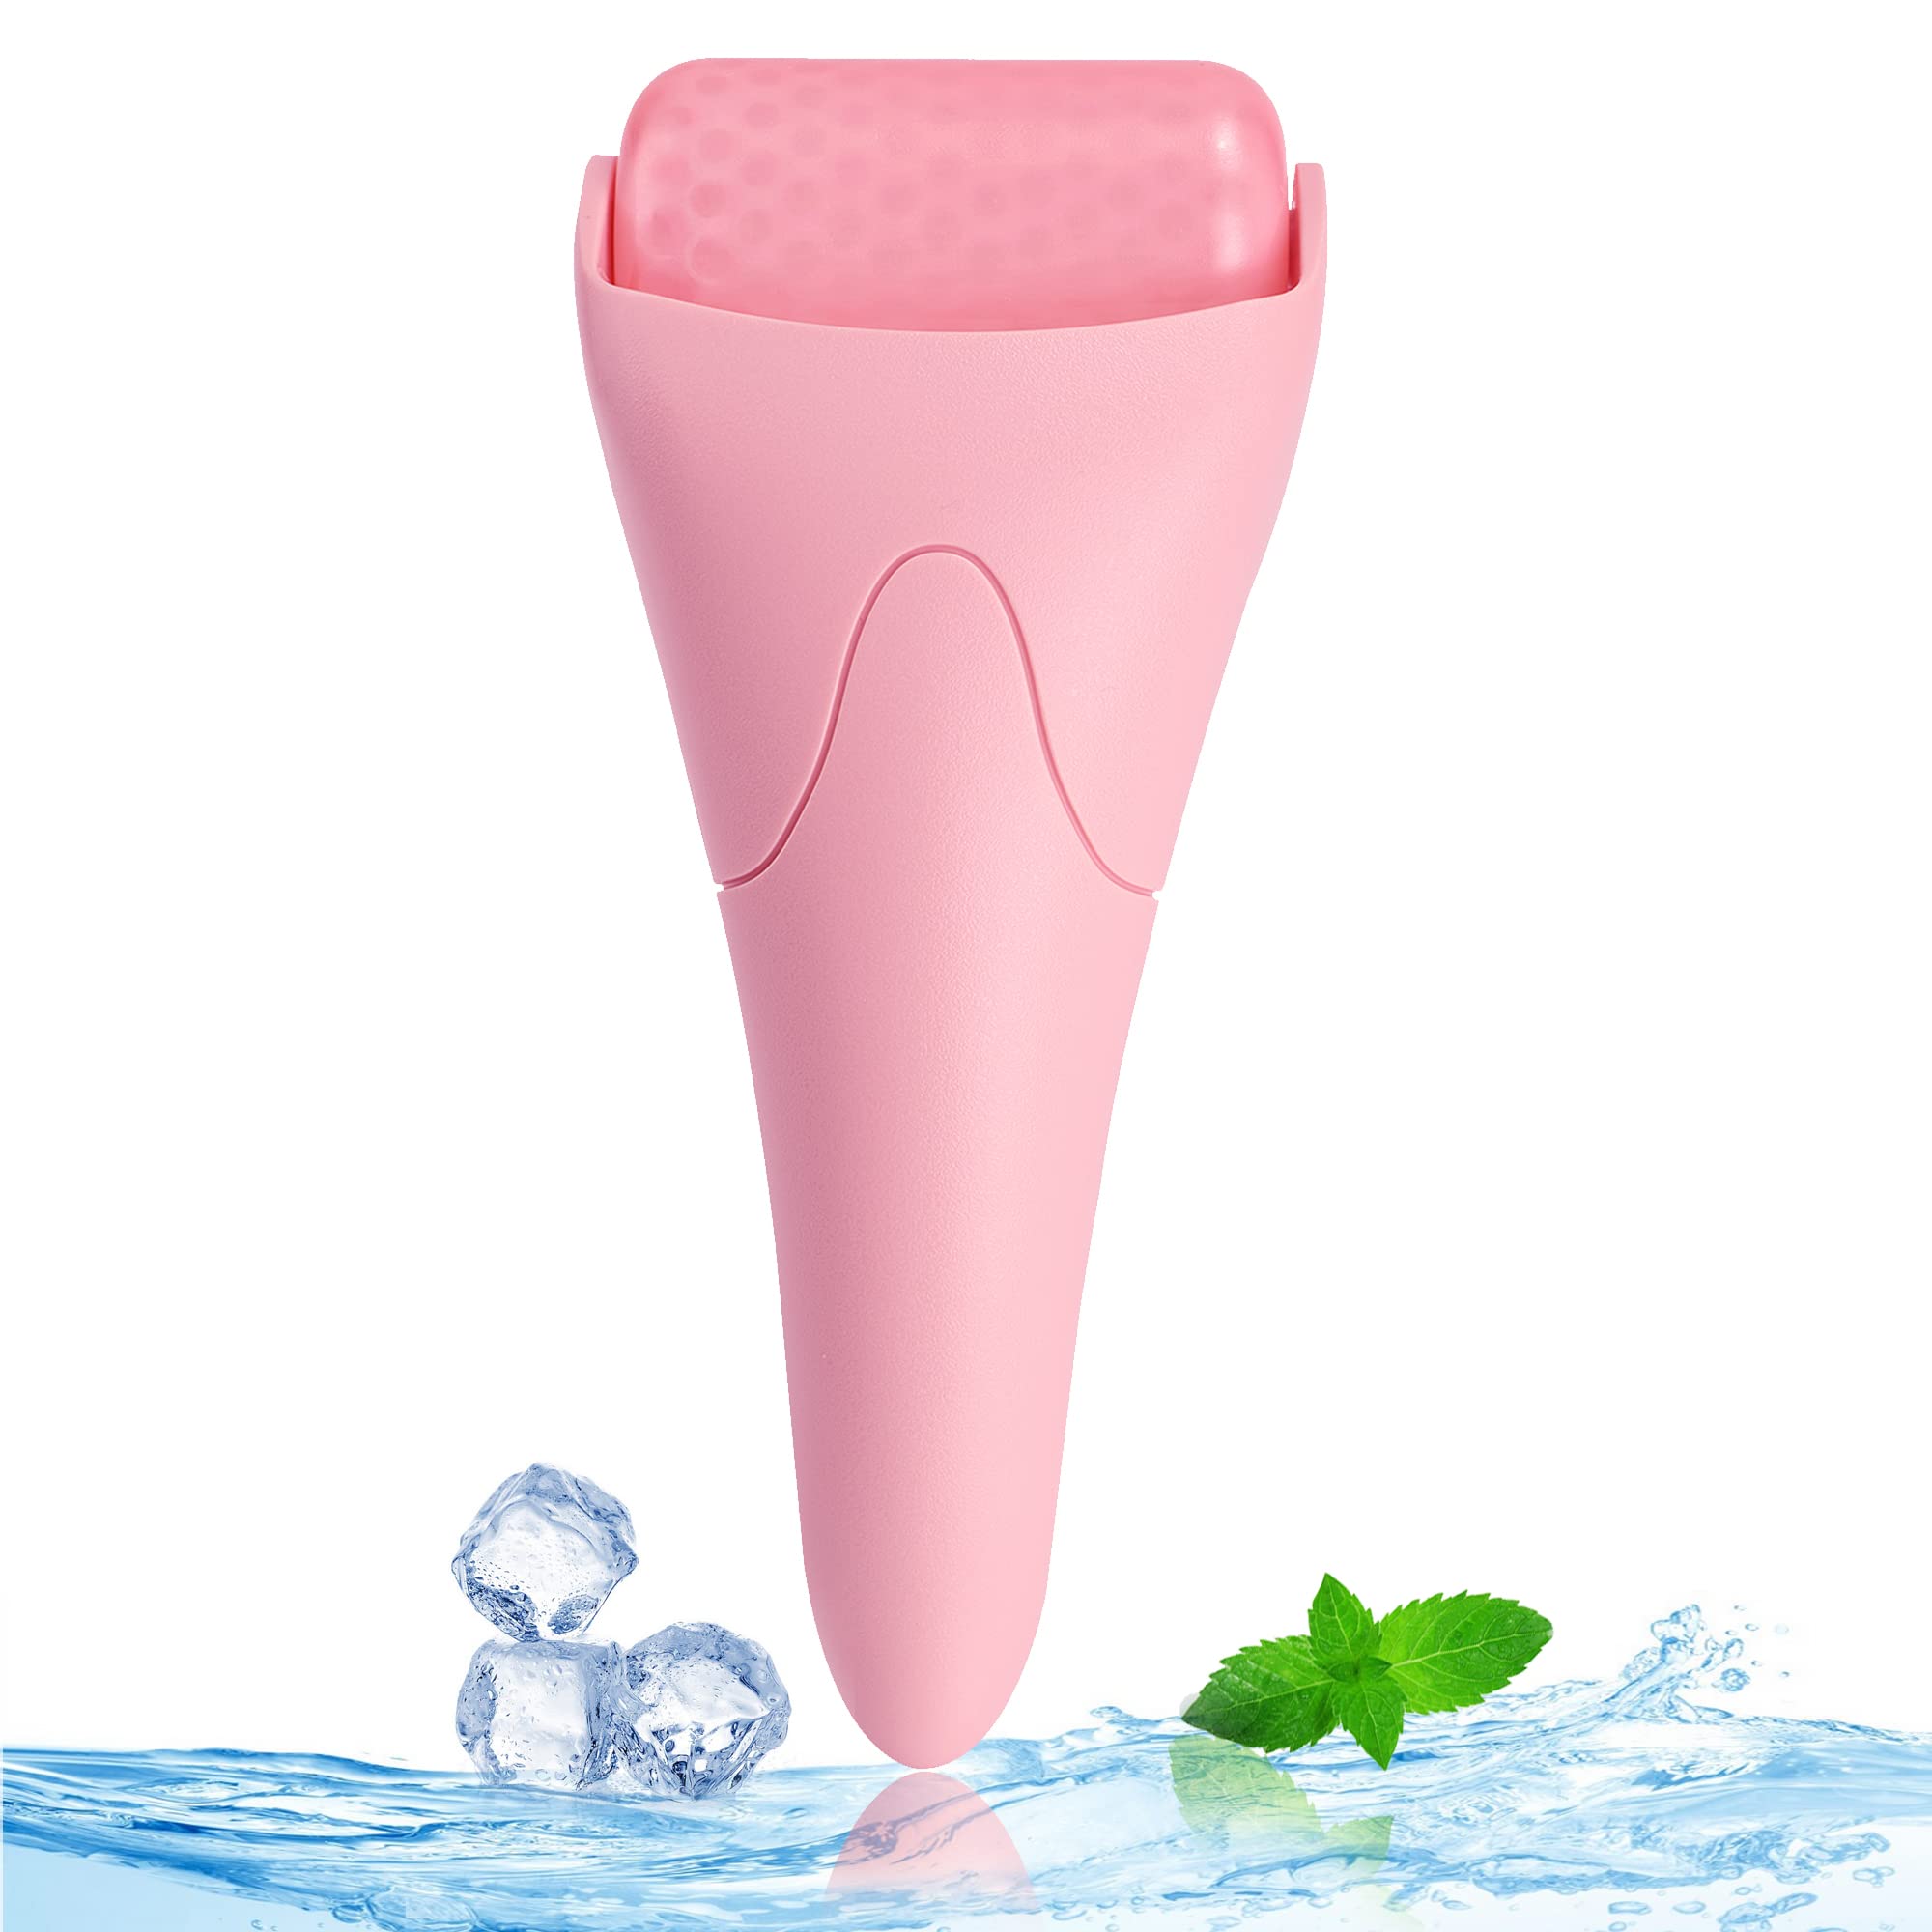 Ice Roller for Face, Eyes and Whole Body Relief, Face Roller Skin Care Tool  for Migraine Relief and Blood Circulation (Pink Handle+Pink Roller Head)